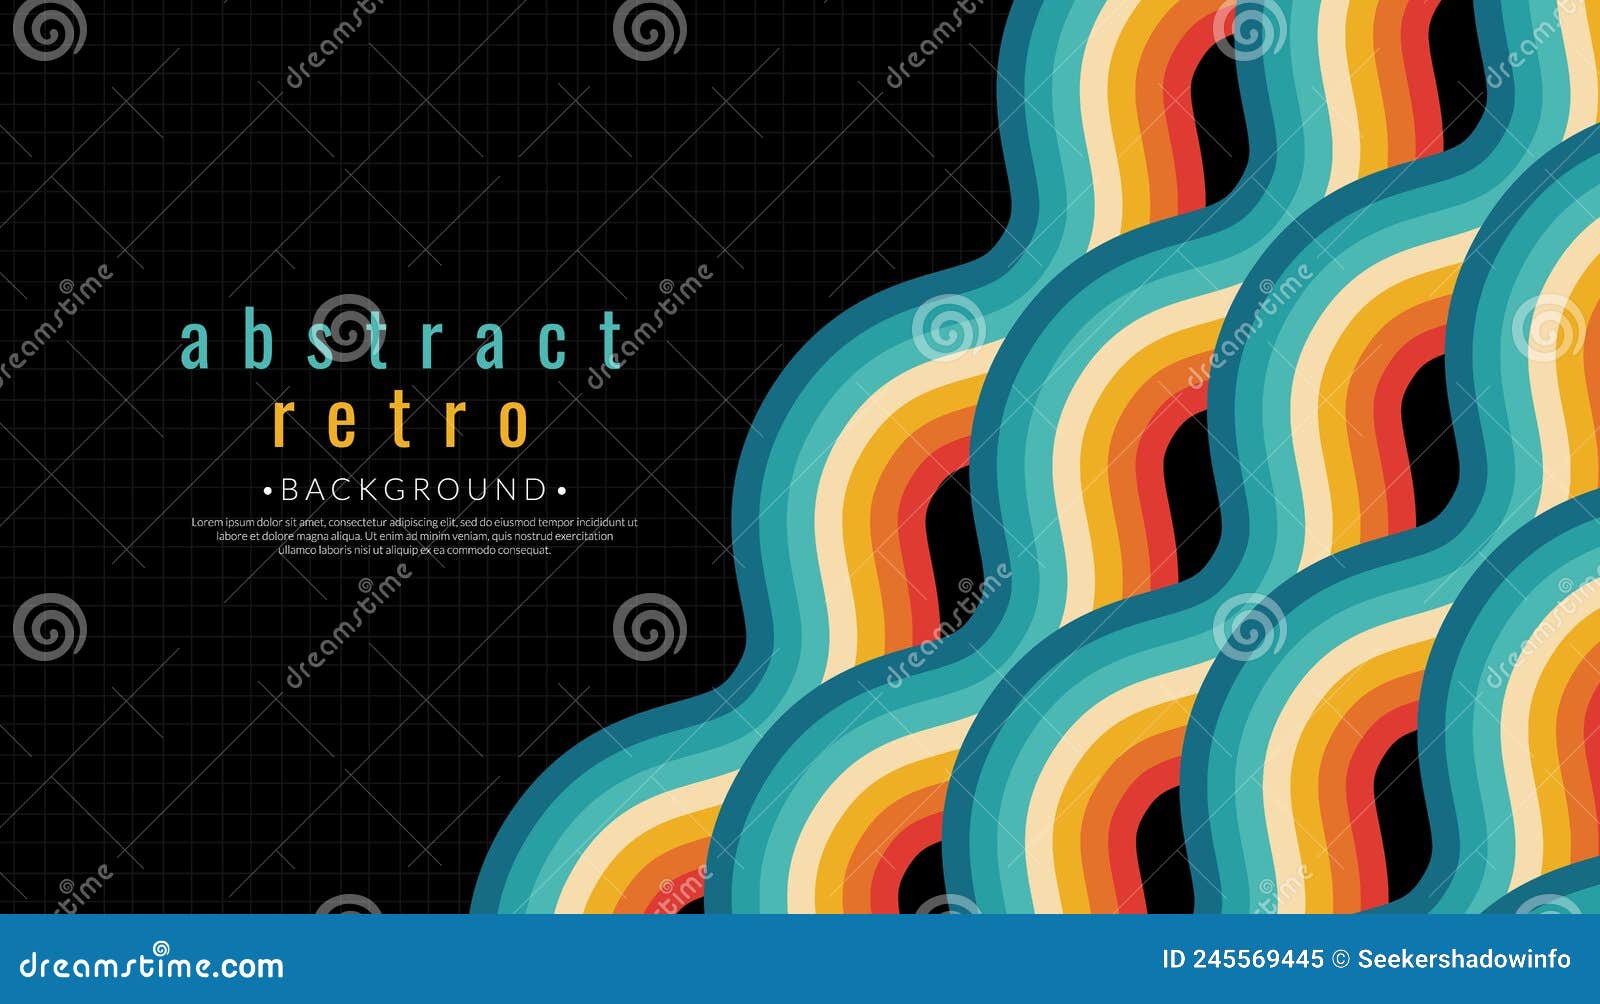 Abstract Retro 70s Background. Vintage 70s Wave Stripes Colorful Rainbow.  1970s Color Wallpaper Stock Vector - Illustration of wall, texture:  245569445